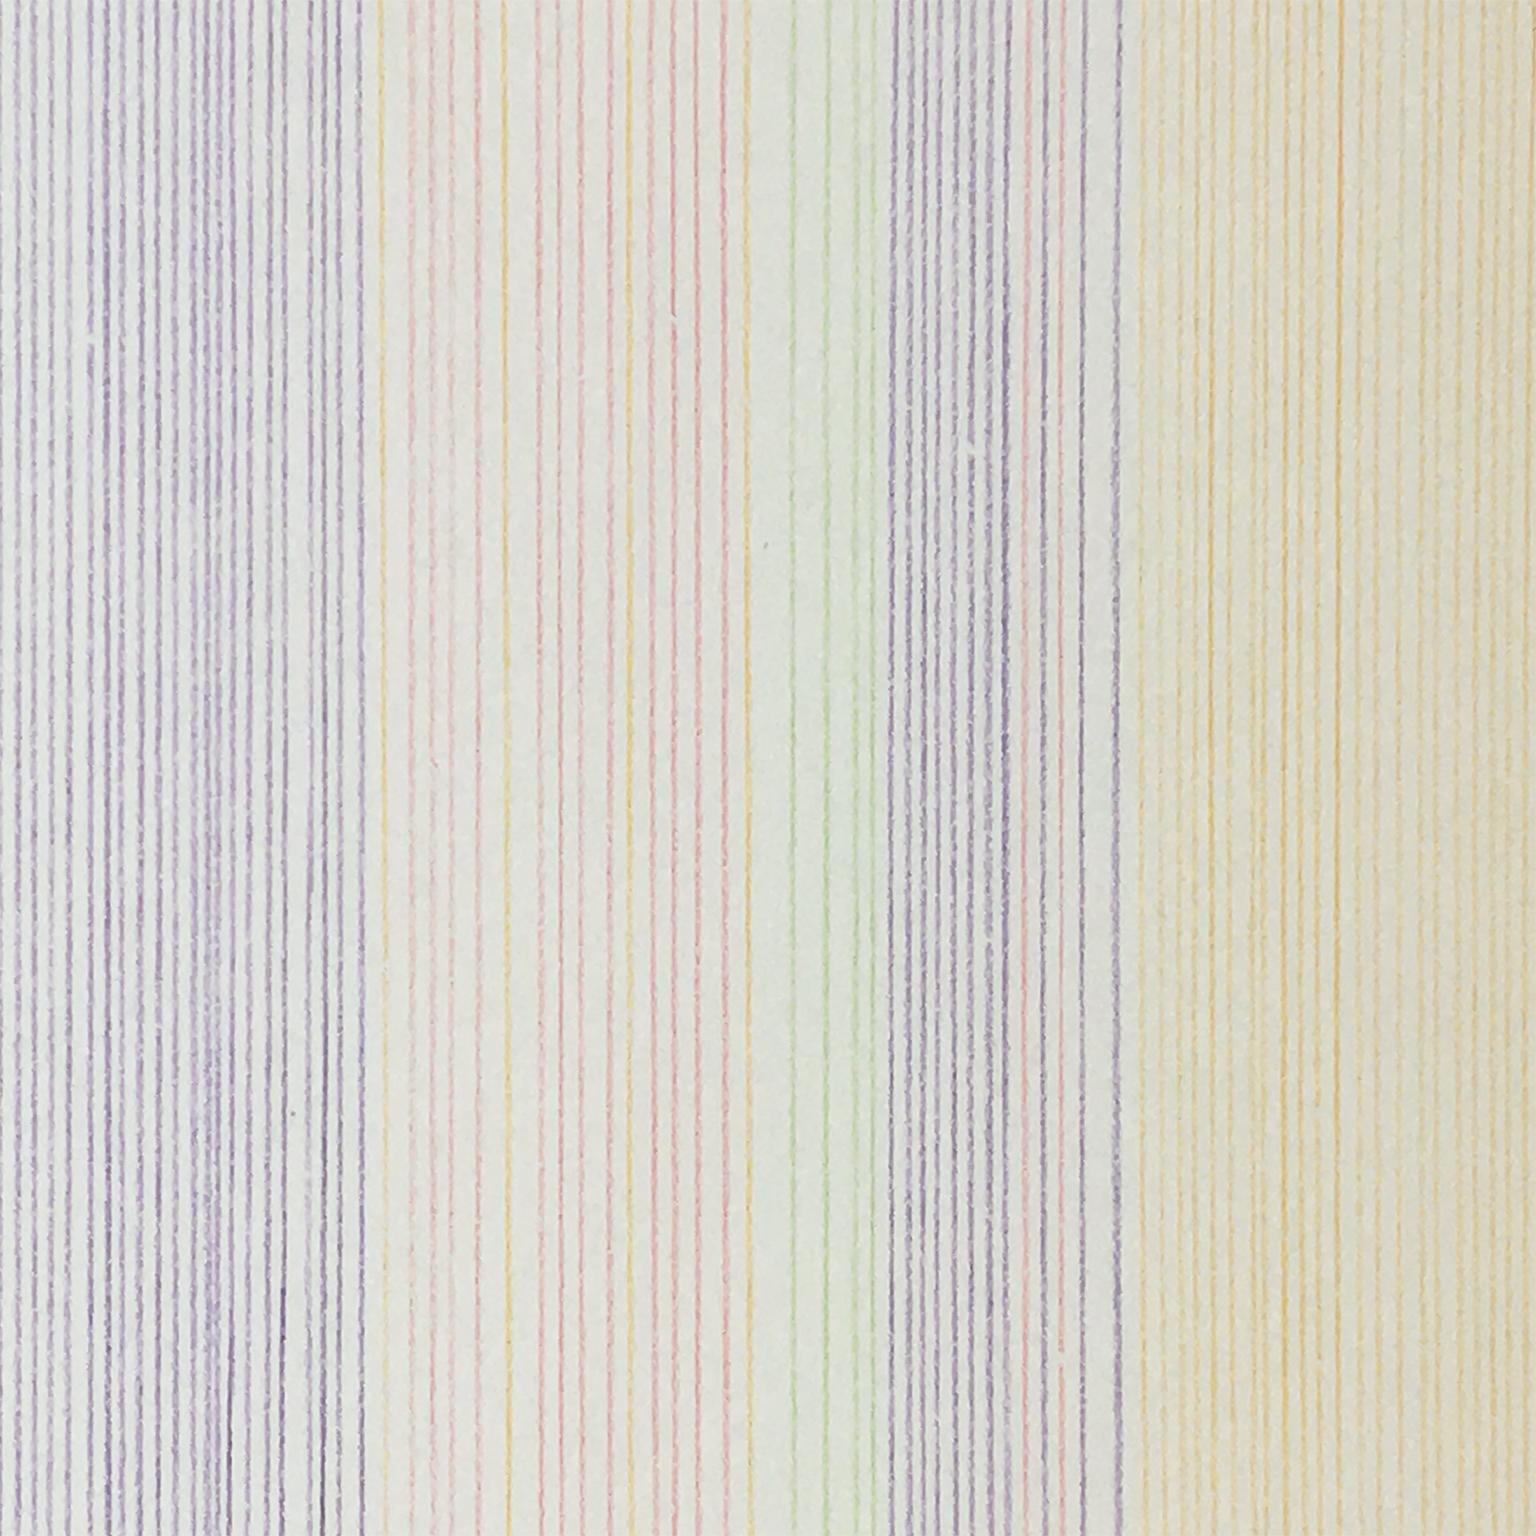 Home Run: abstract modern minimalist color field drawing with rainbow colors - Beige Print by Gene Davis